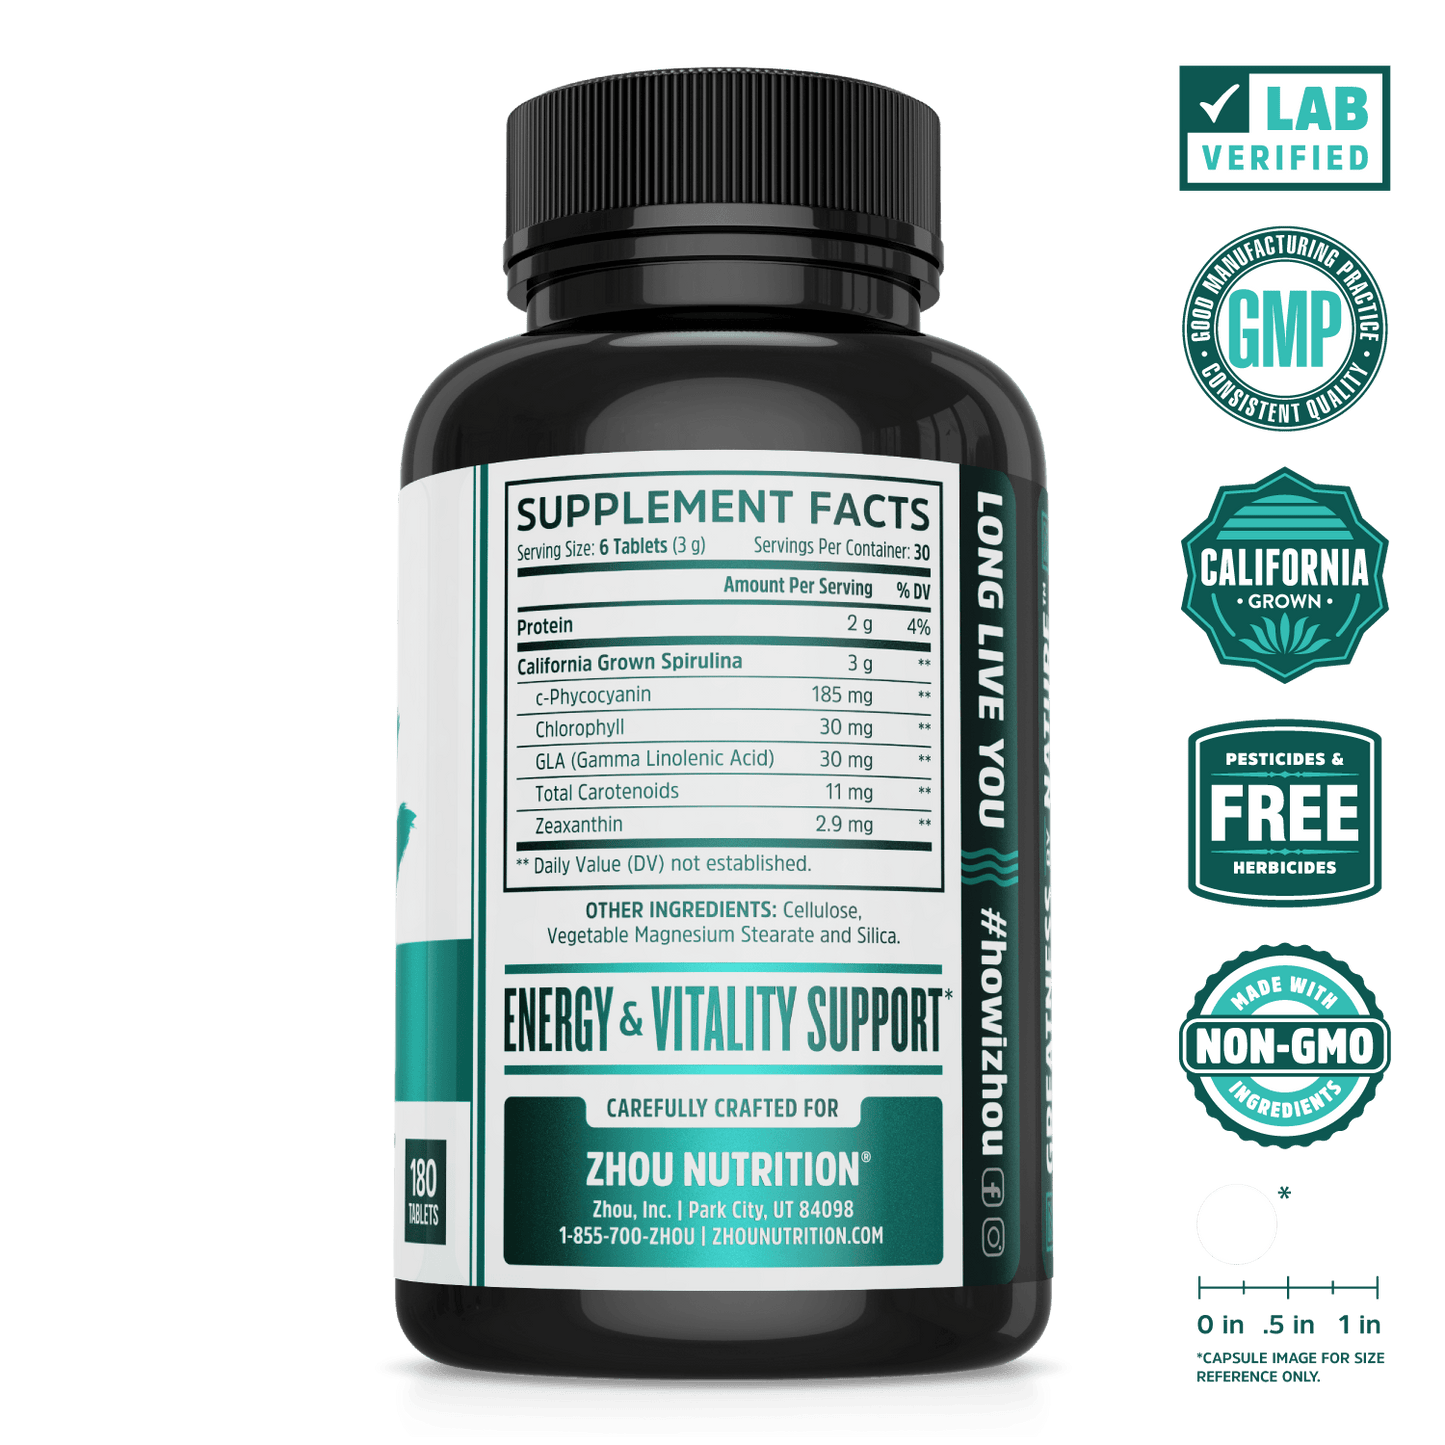 Zhou Nutrition Spirulina Superfood Tablets. Lab verified, good manufacturing practices, california grown, pesticides & herbicides free, made with non-GMO ingredients